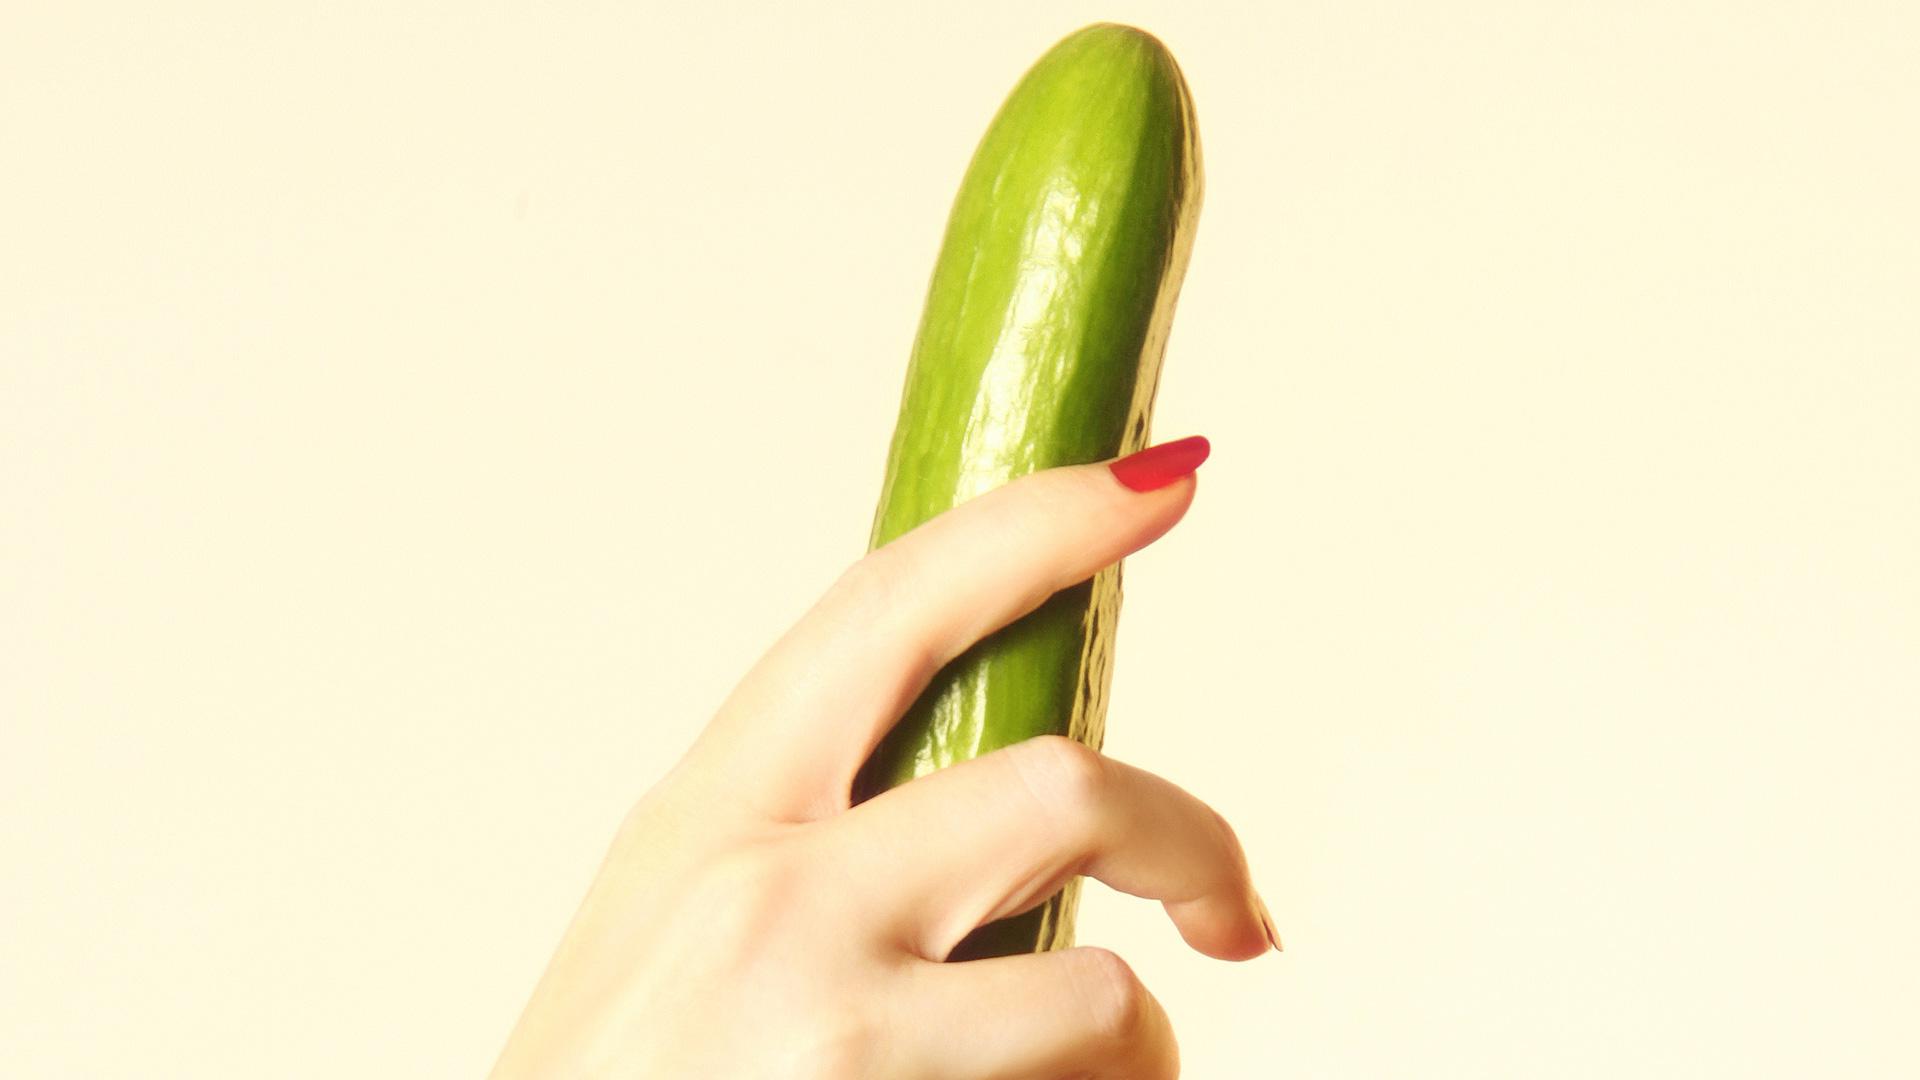 brooke anderson nichols recommends using a cucumber as a dildo pic